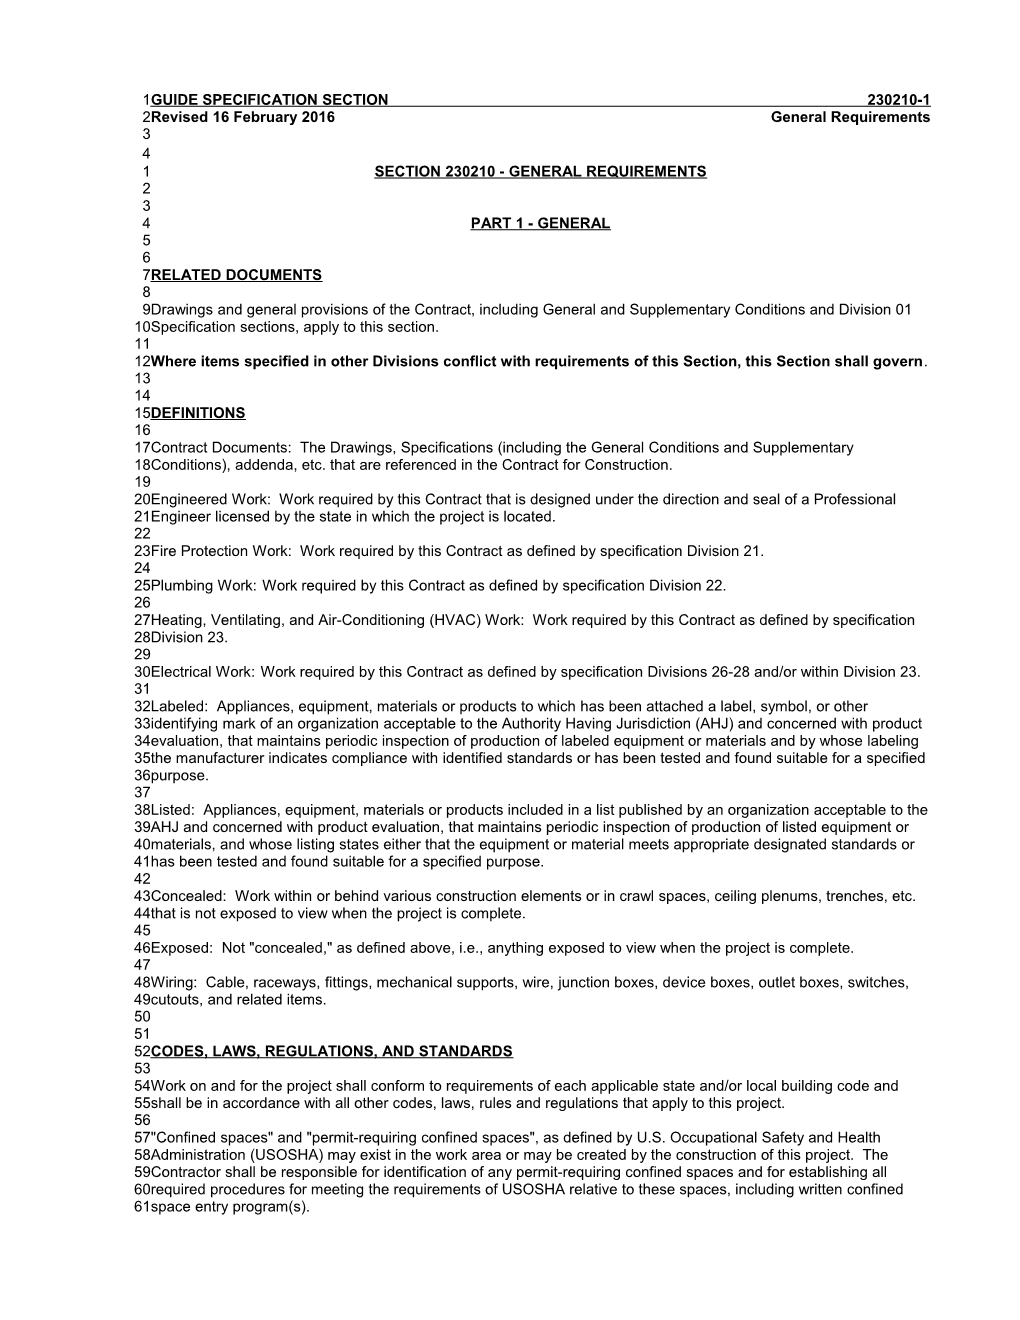 Section 019913 - General Requirements Engineered Work